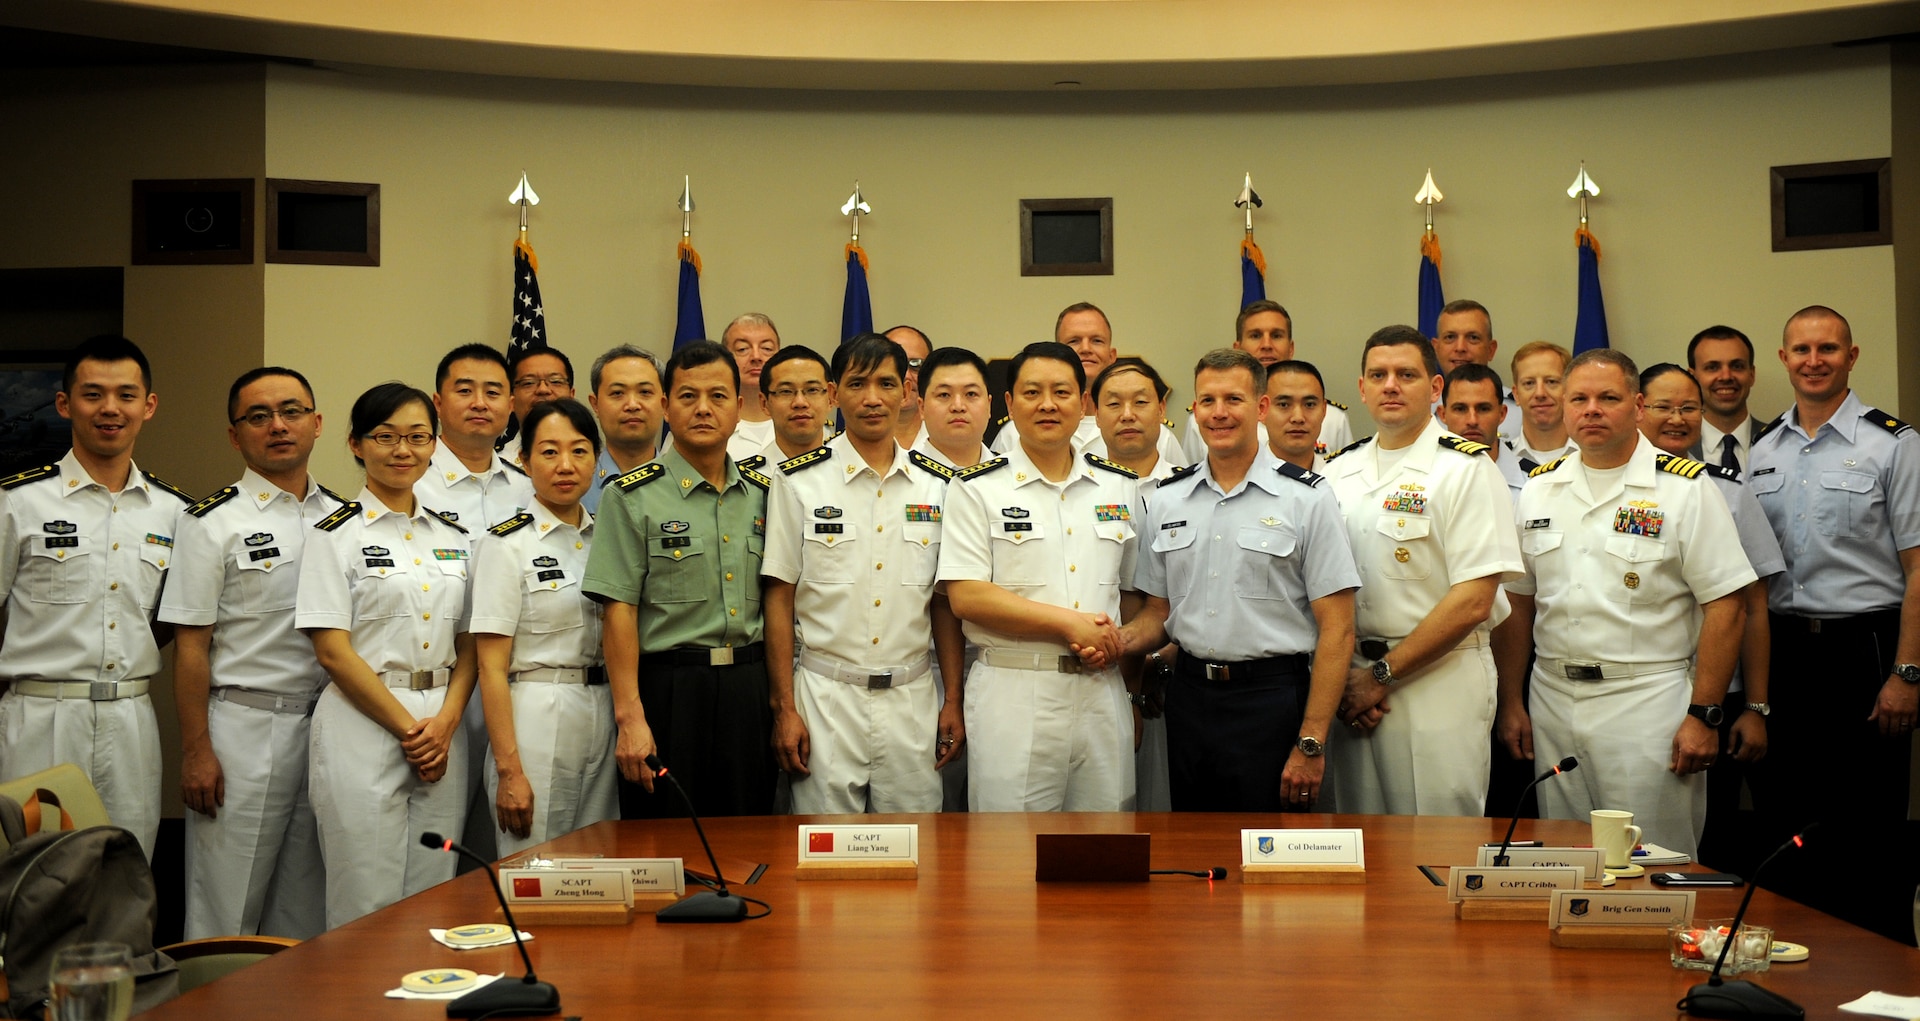 JOINT BASE PEARL HARBOR-HICKAM, Hawaii (Nov. 25, 2015) - Representatives from the U.S. and PRC militaries pose for a group photo prior to the start of the bi-annual Military Maritime Consultative Agreement (MMCA) talks, held Nov. 21-24, at Headquarters, Pacific Air Forces, Joint Base Pearl Harbor-Hickam, Hawaii. The bilateral MMCA talks are a long-standing mechanism designed to provide open and transparent communication to address concerns and develop common understanding between U.S. and PRC air and naval forces in order to avoid unsafe incidents and minimize risk.